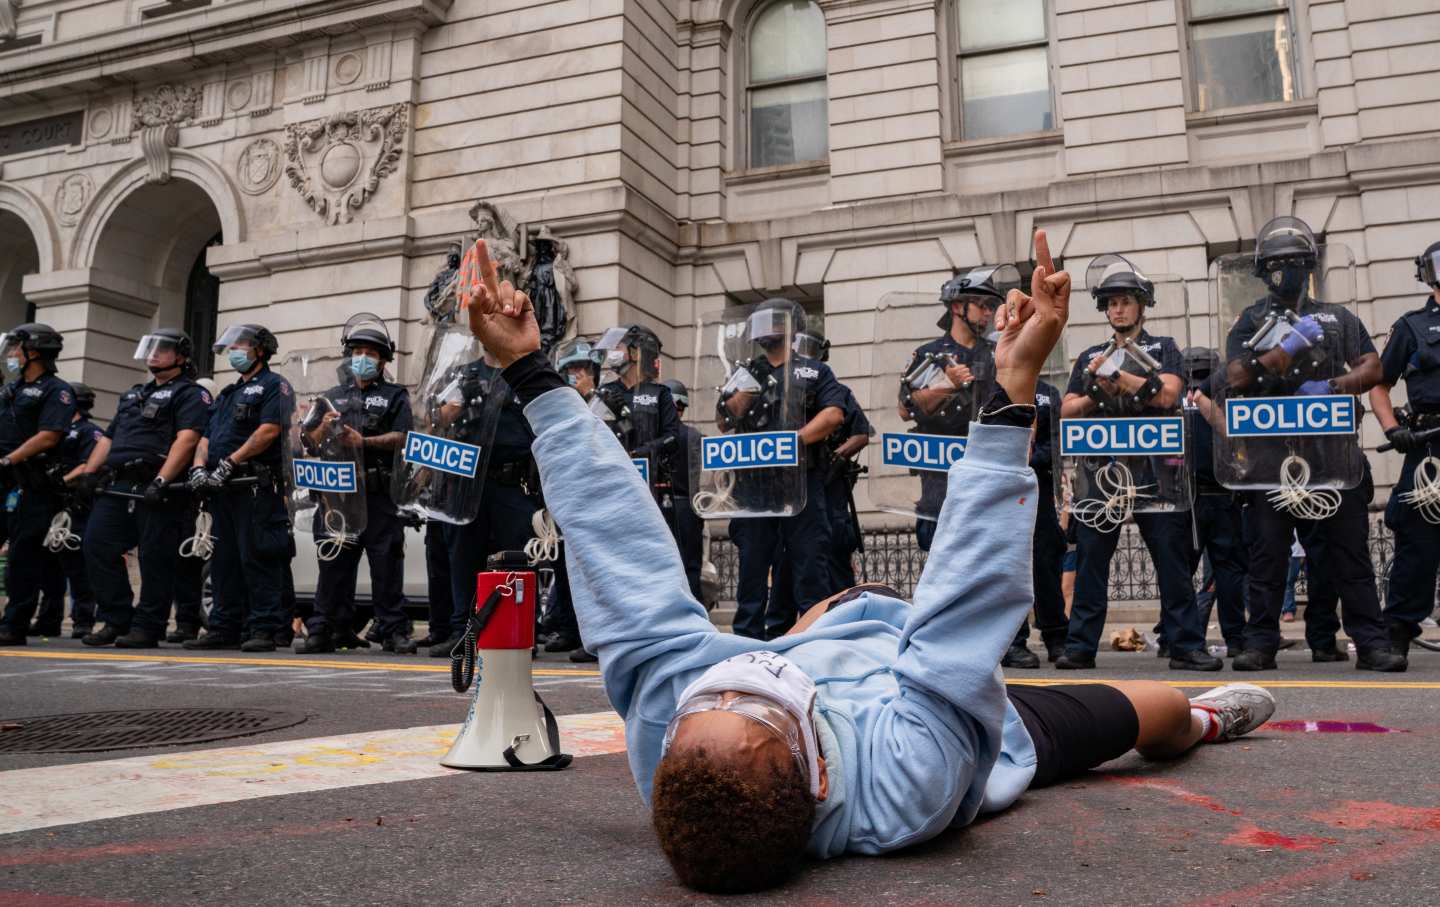 A person lies on the ground in front of a group of police officers